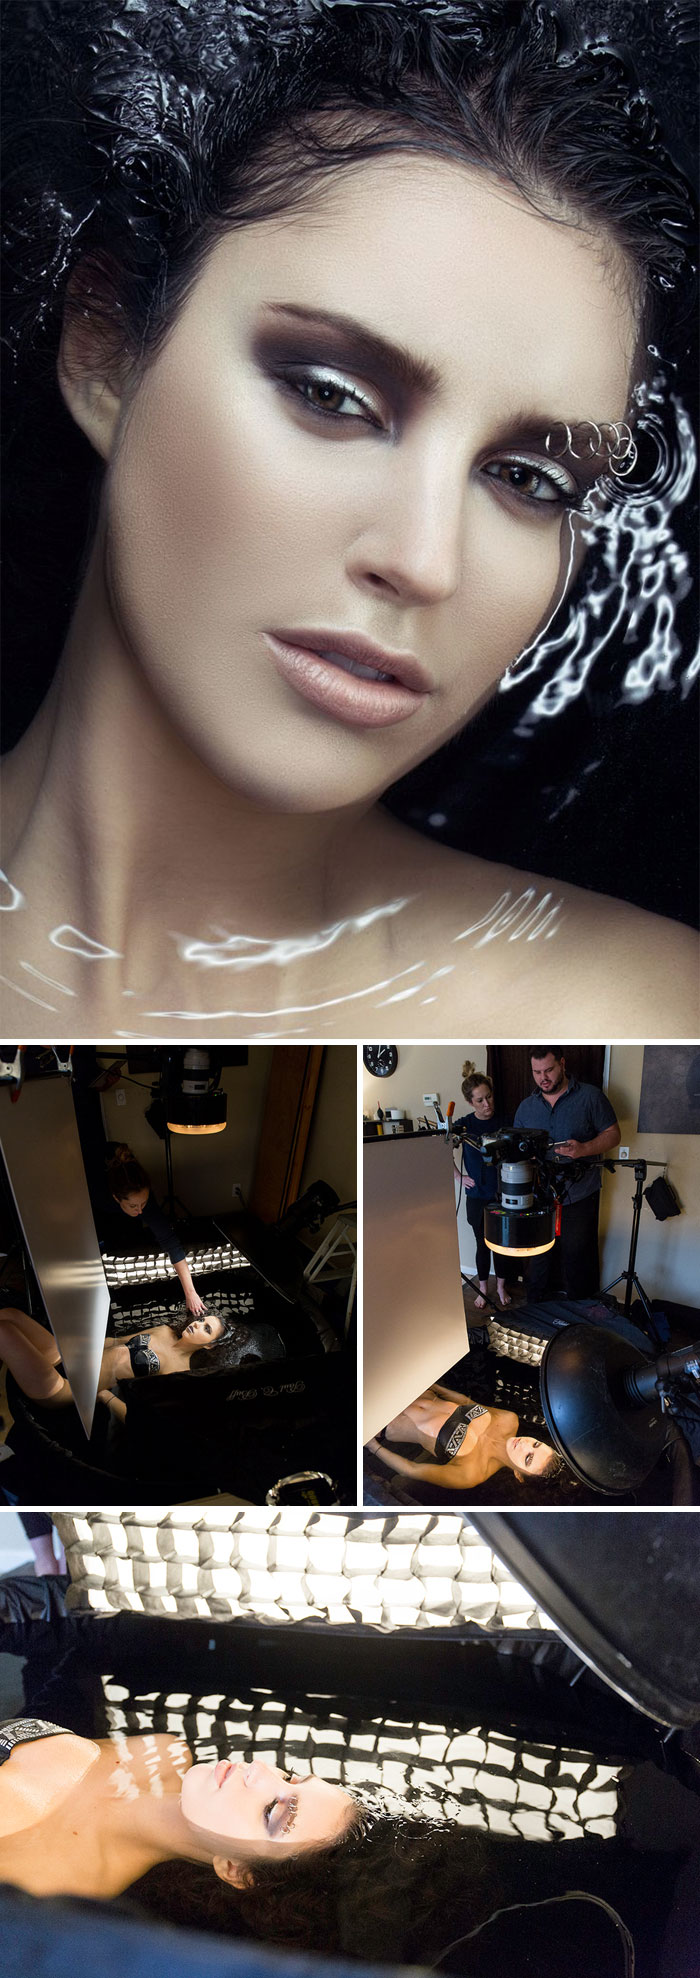 Picture of girl with makeup and eyebrow rings emerging from the water and a pic of how the studio was set up to take the picture.